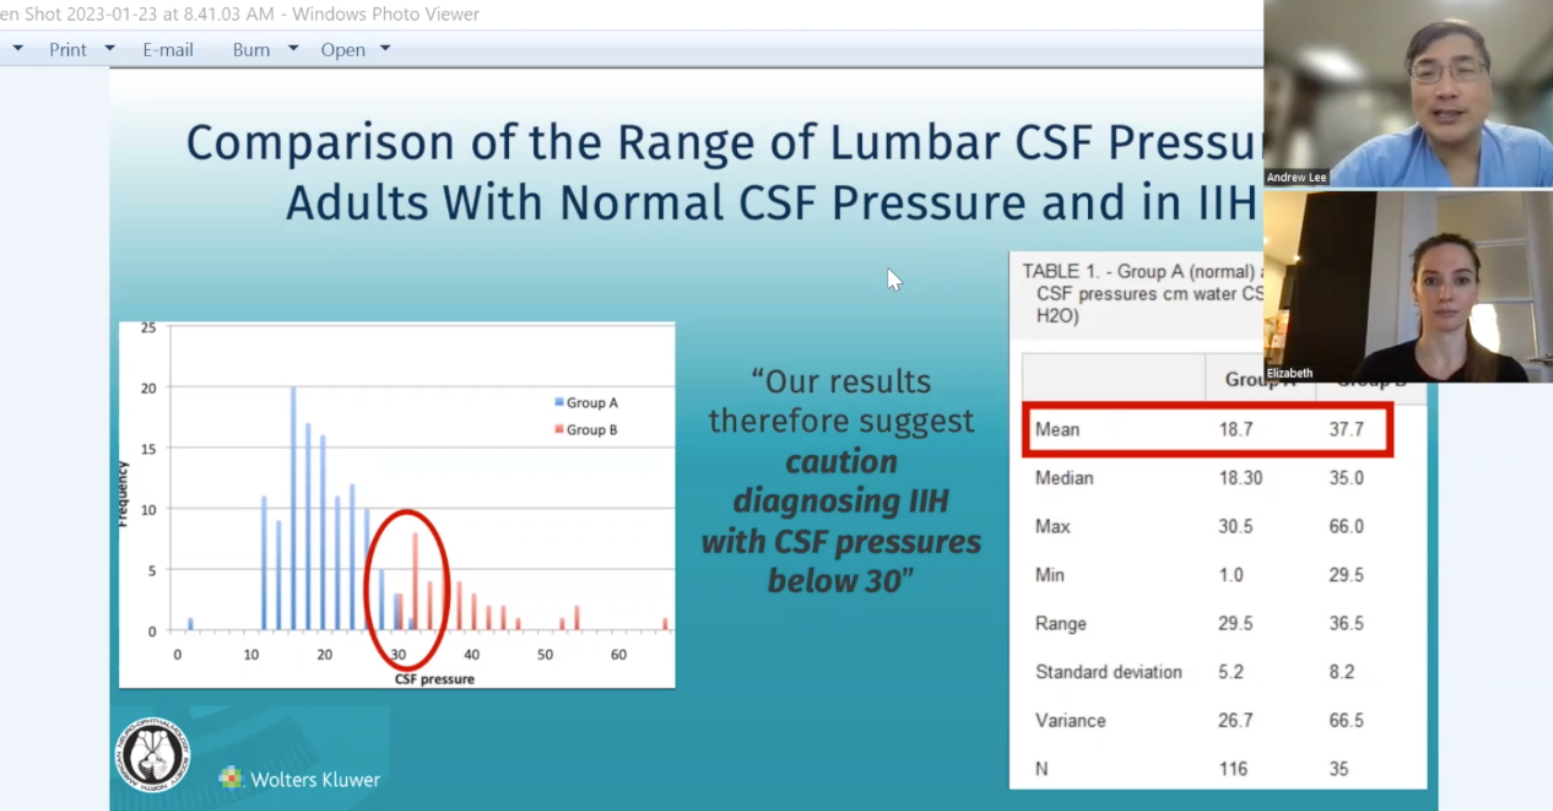 VLOG: Comparison of the Range of Lumbar CSF Pressure in Adults with Normal CSF Pressure and in IIH